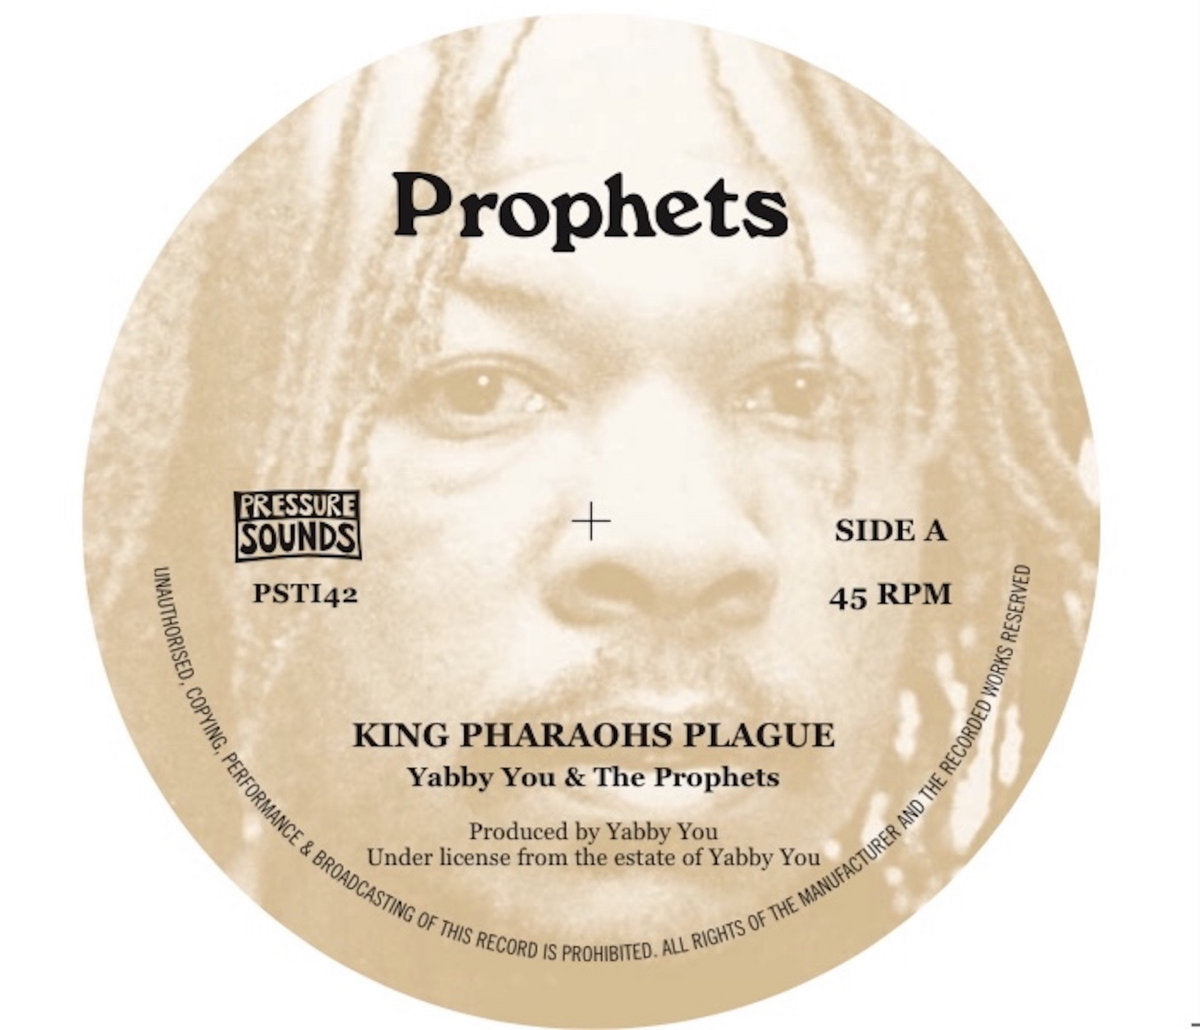 Yabby You & The Prophets - King Pharaohs Plague